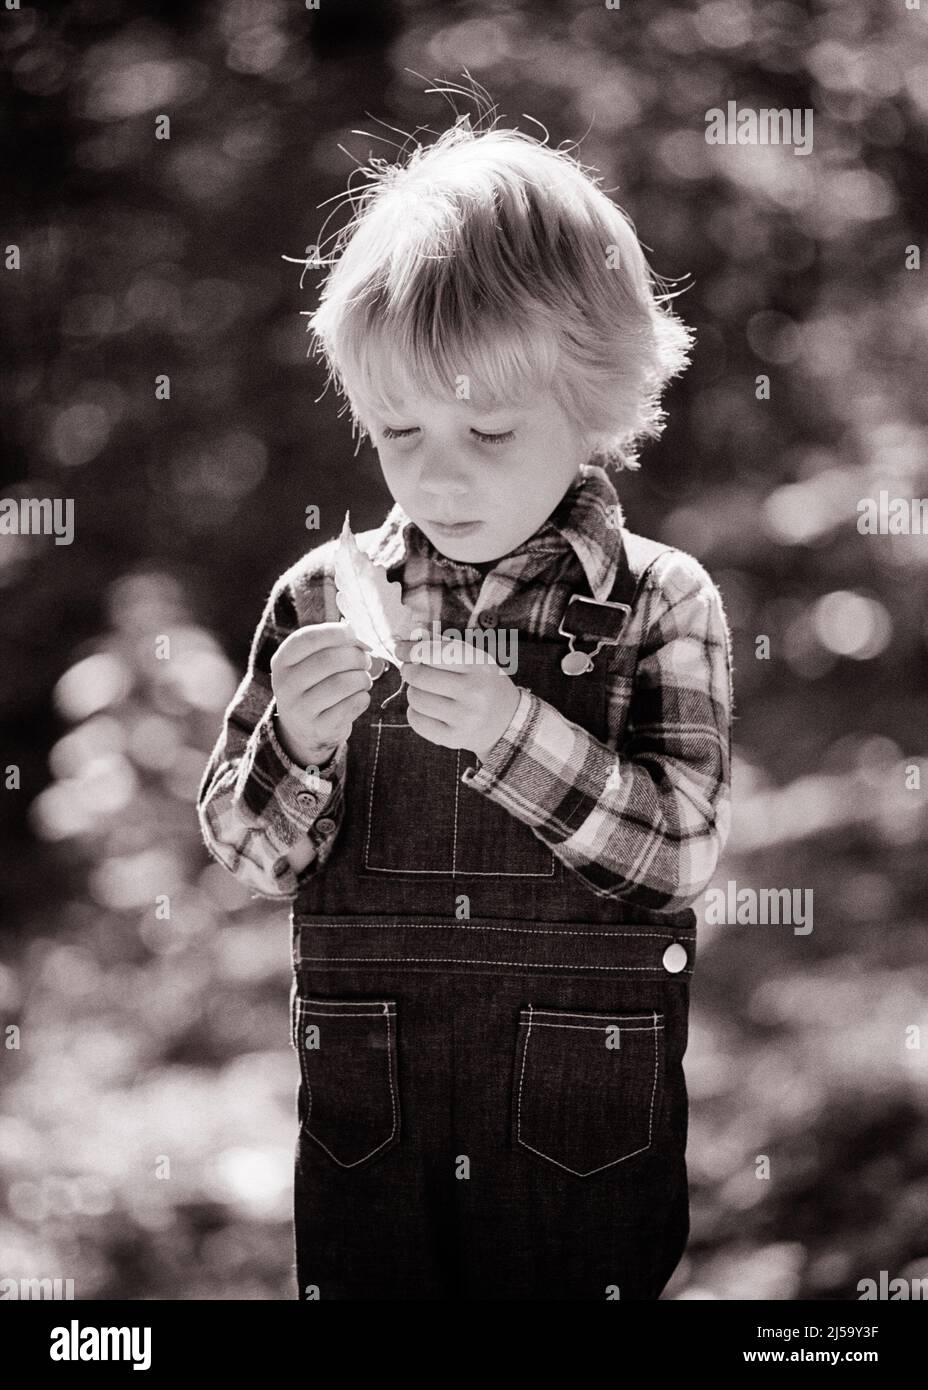 1970s BLONDE TODDLER BOY HOLDING STUDYING AN AUTUMN LEAF BOY WEARING DENIM BIB OVERALLS PLAID SHIRT - j14284 HAR001 HARS MALES PLAID DENIM B&W DREAMS DISCOVERY LEAF FALL SEASON MOOD IMAGINATION BIB OVERALLS PLAID SHIRT PLEASANT SOLEMN AGREEABLE BIB CHARMING FOCUSED GROWTH INFORMAL INTENSE JUVENILES LOVABLE PLEASING TWILL ADORABLE APPEALING AUTUMNAL BLACK AND WHITE CAREFUL CASUAL CAUCASIAN ETHNICITY FALL FOLIAGE HAR001 INTENT OLD FASHIONED Stock Photo